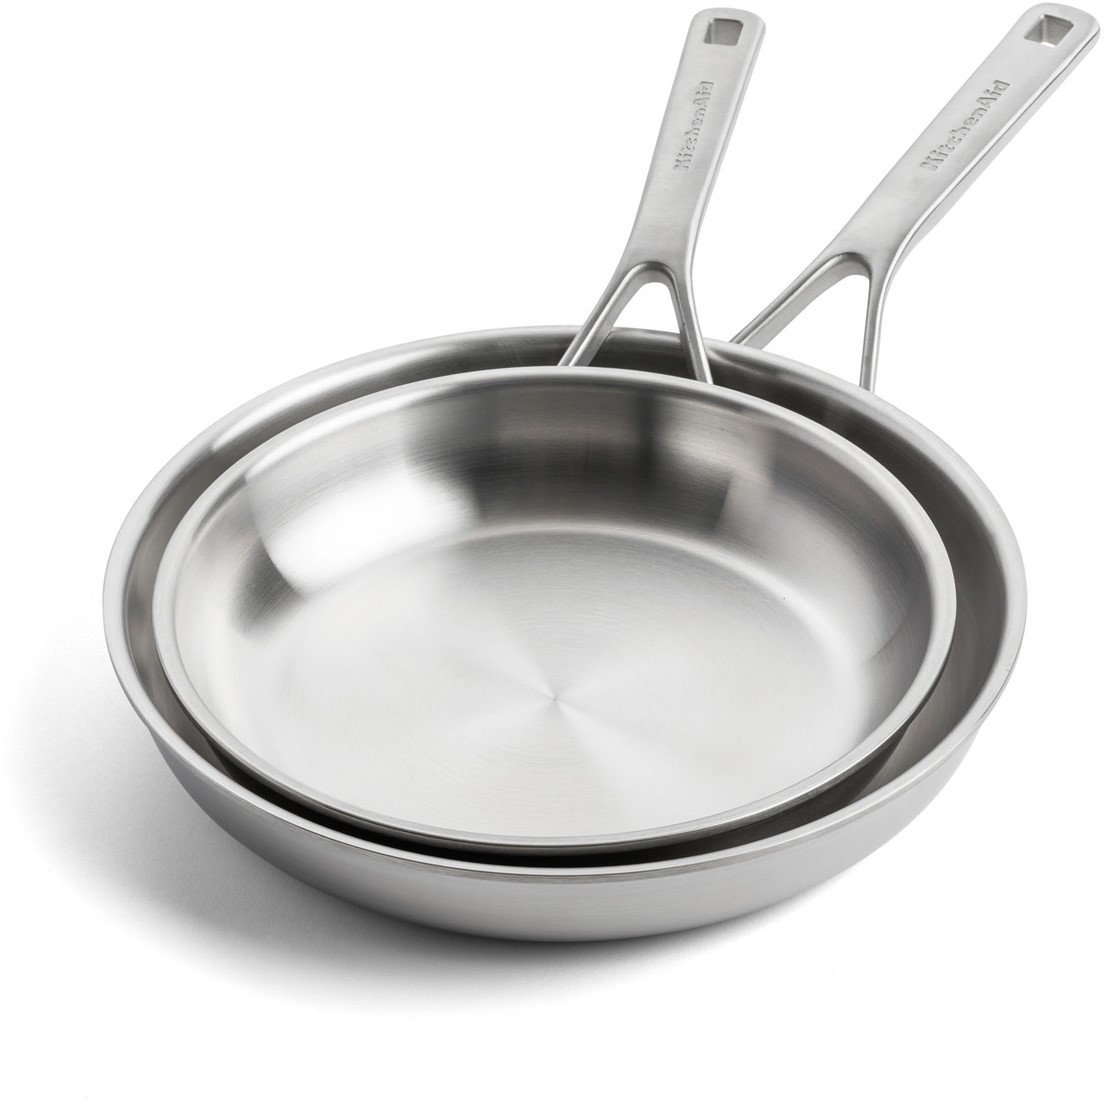 KitchenAid Frying Pan Set Multi-Ply Stainless Steel ø + 28 cm - non-stick coating | Buy now at Cookinglife